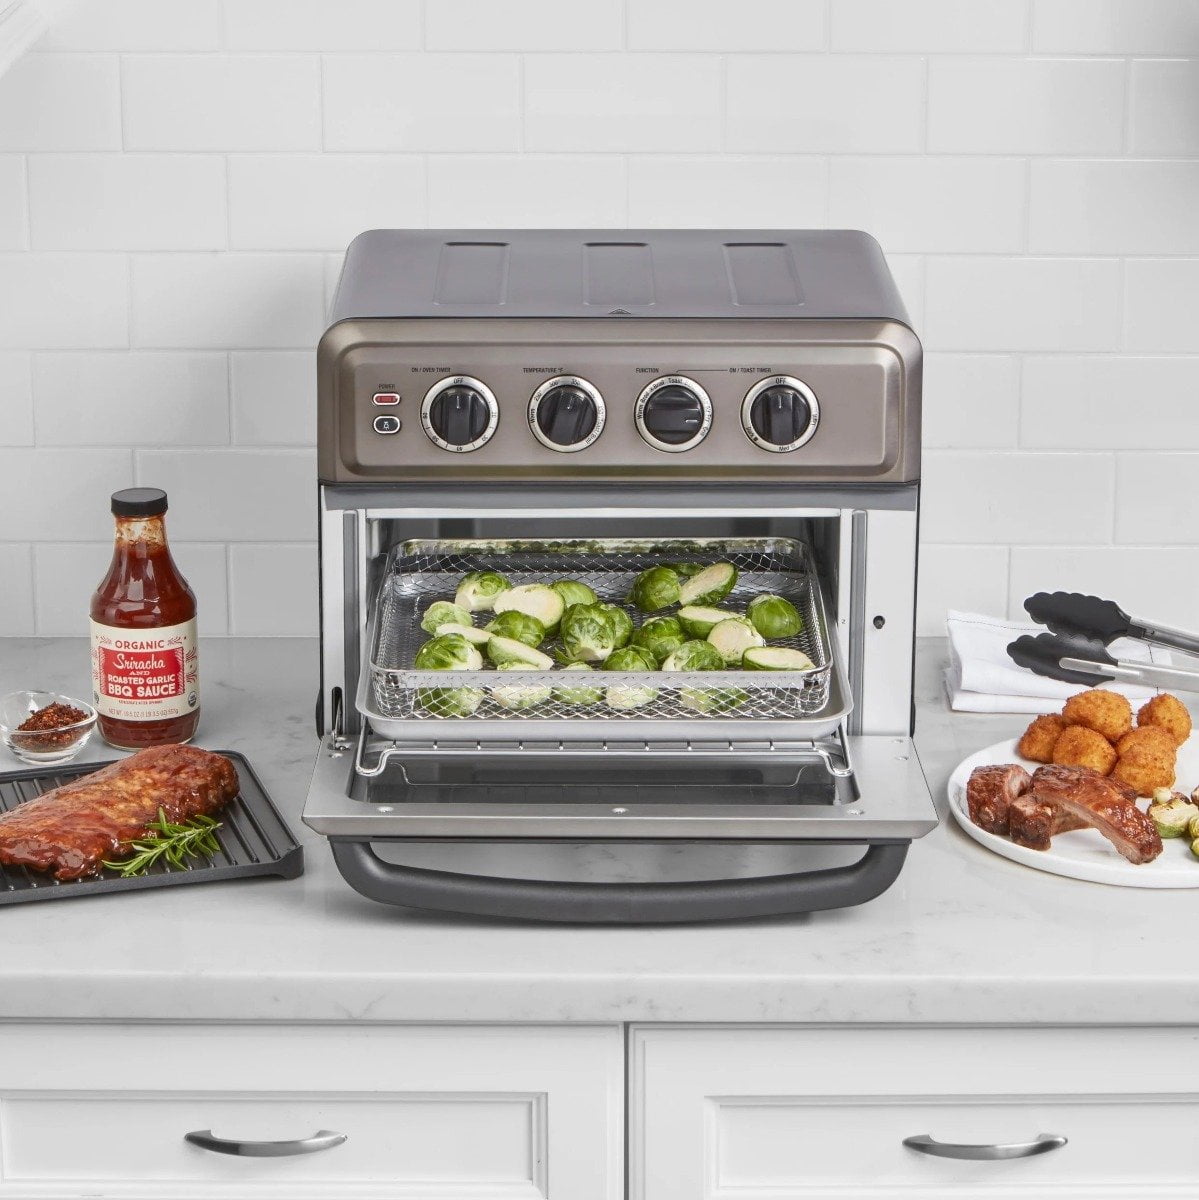 Cuisinart Air Fryer Toaster Oven With Grill – Zest Billings, LLC